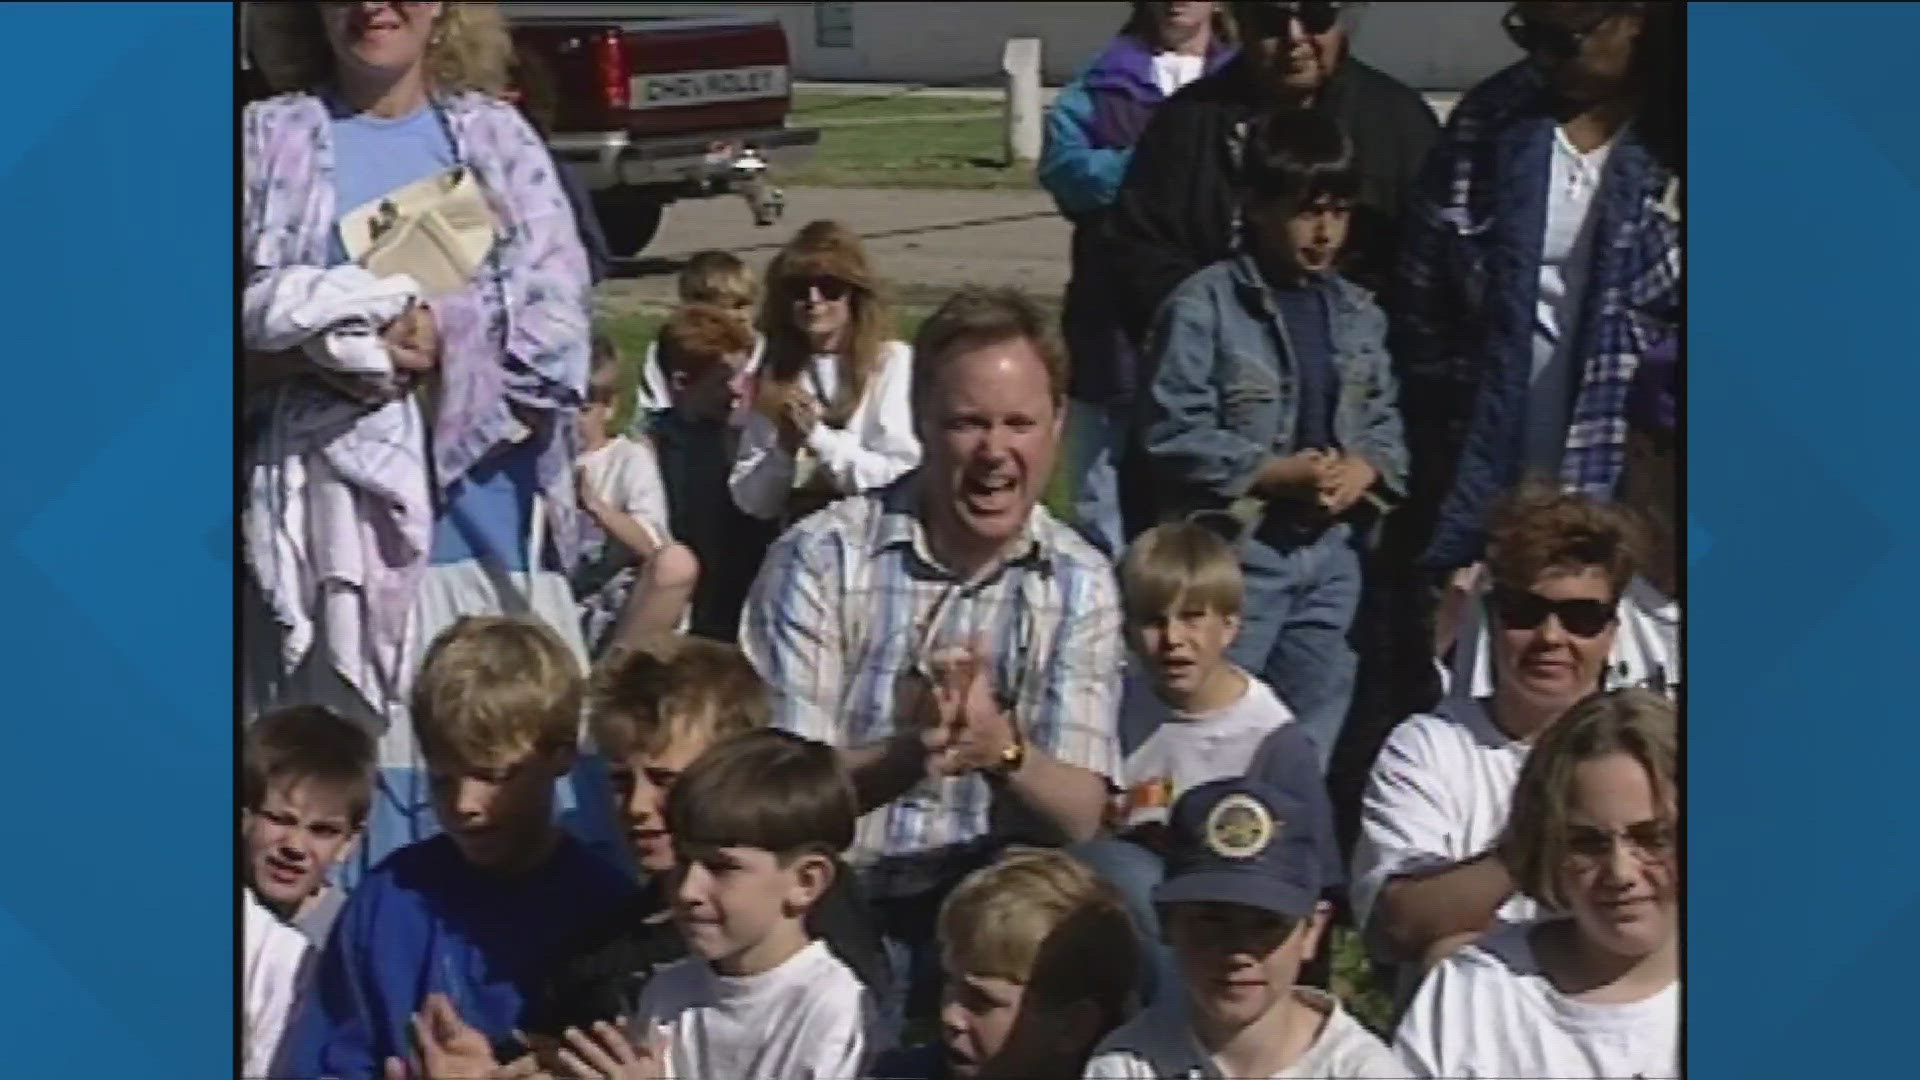 KTVB throws it back to 1995 when Rick Lantz visited the fairgrounds with a third-grade class.